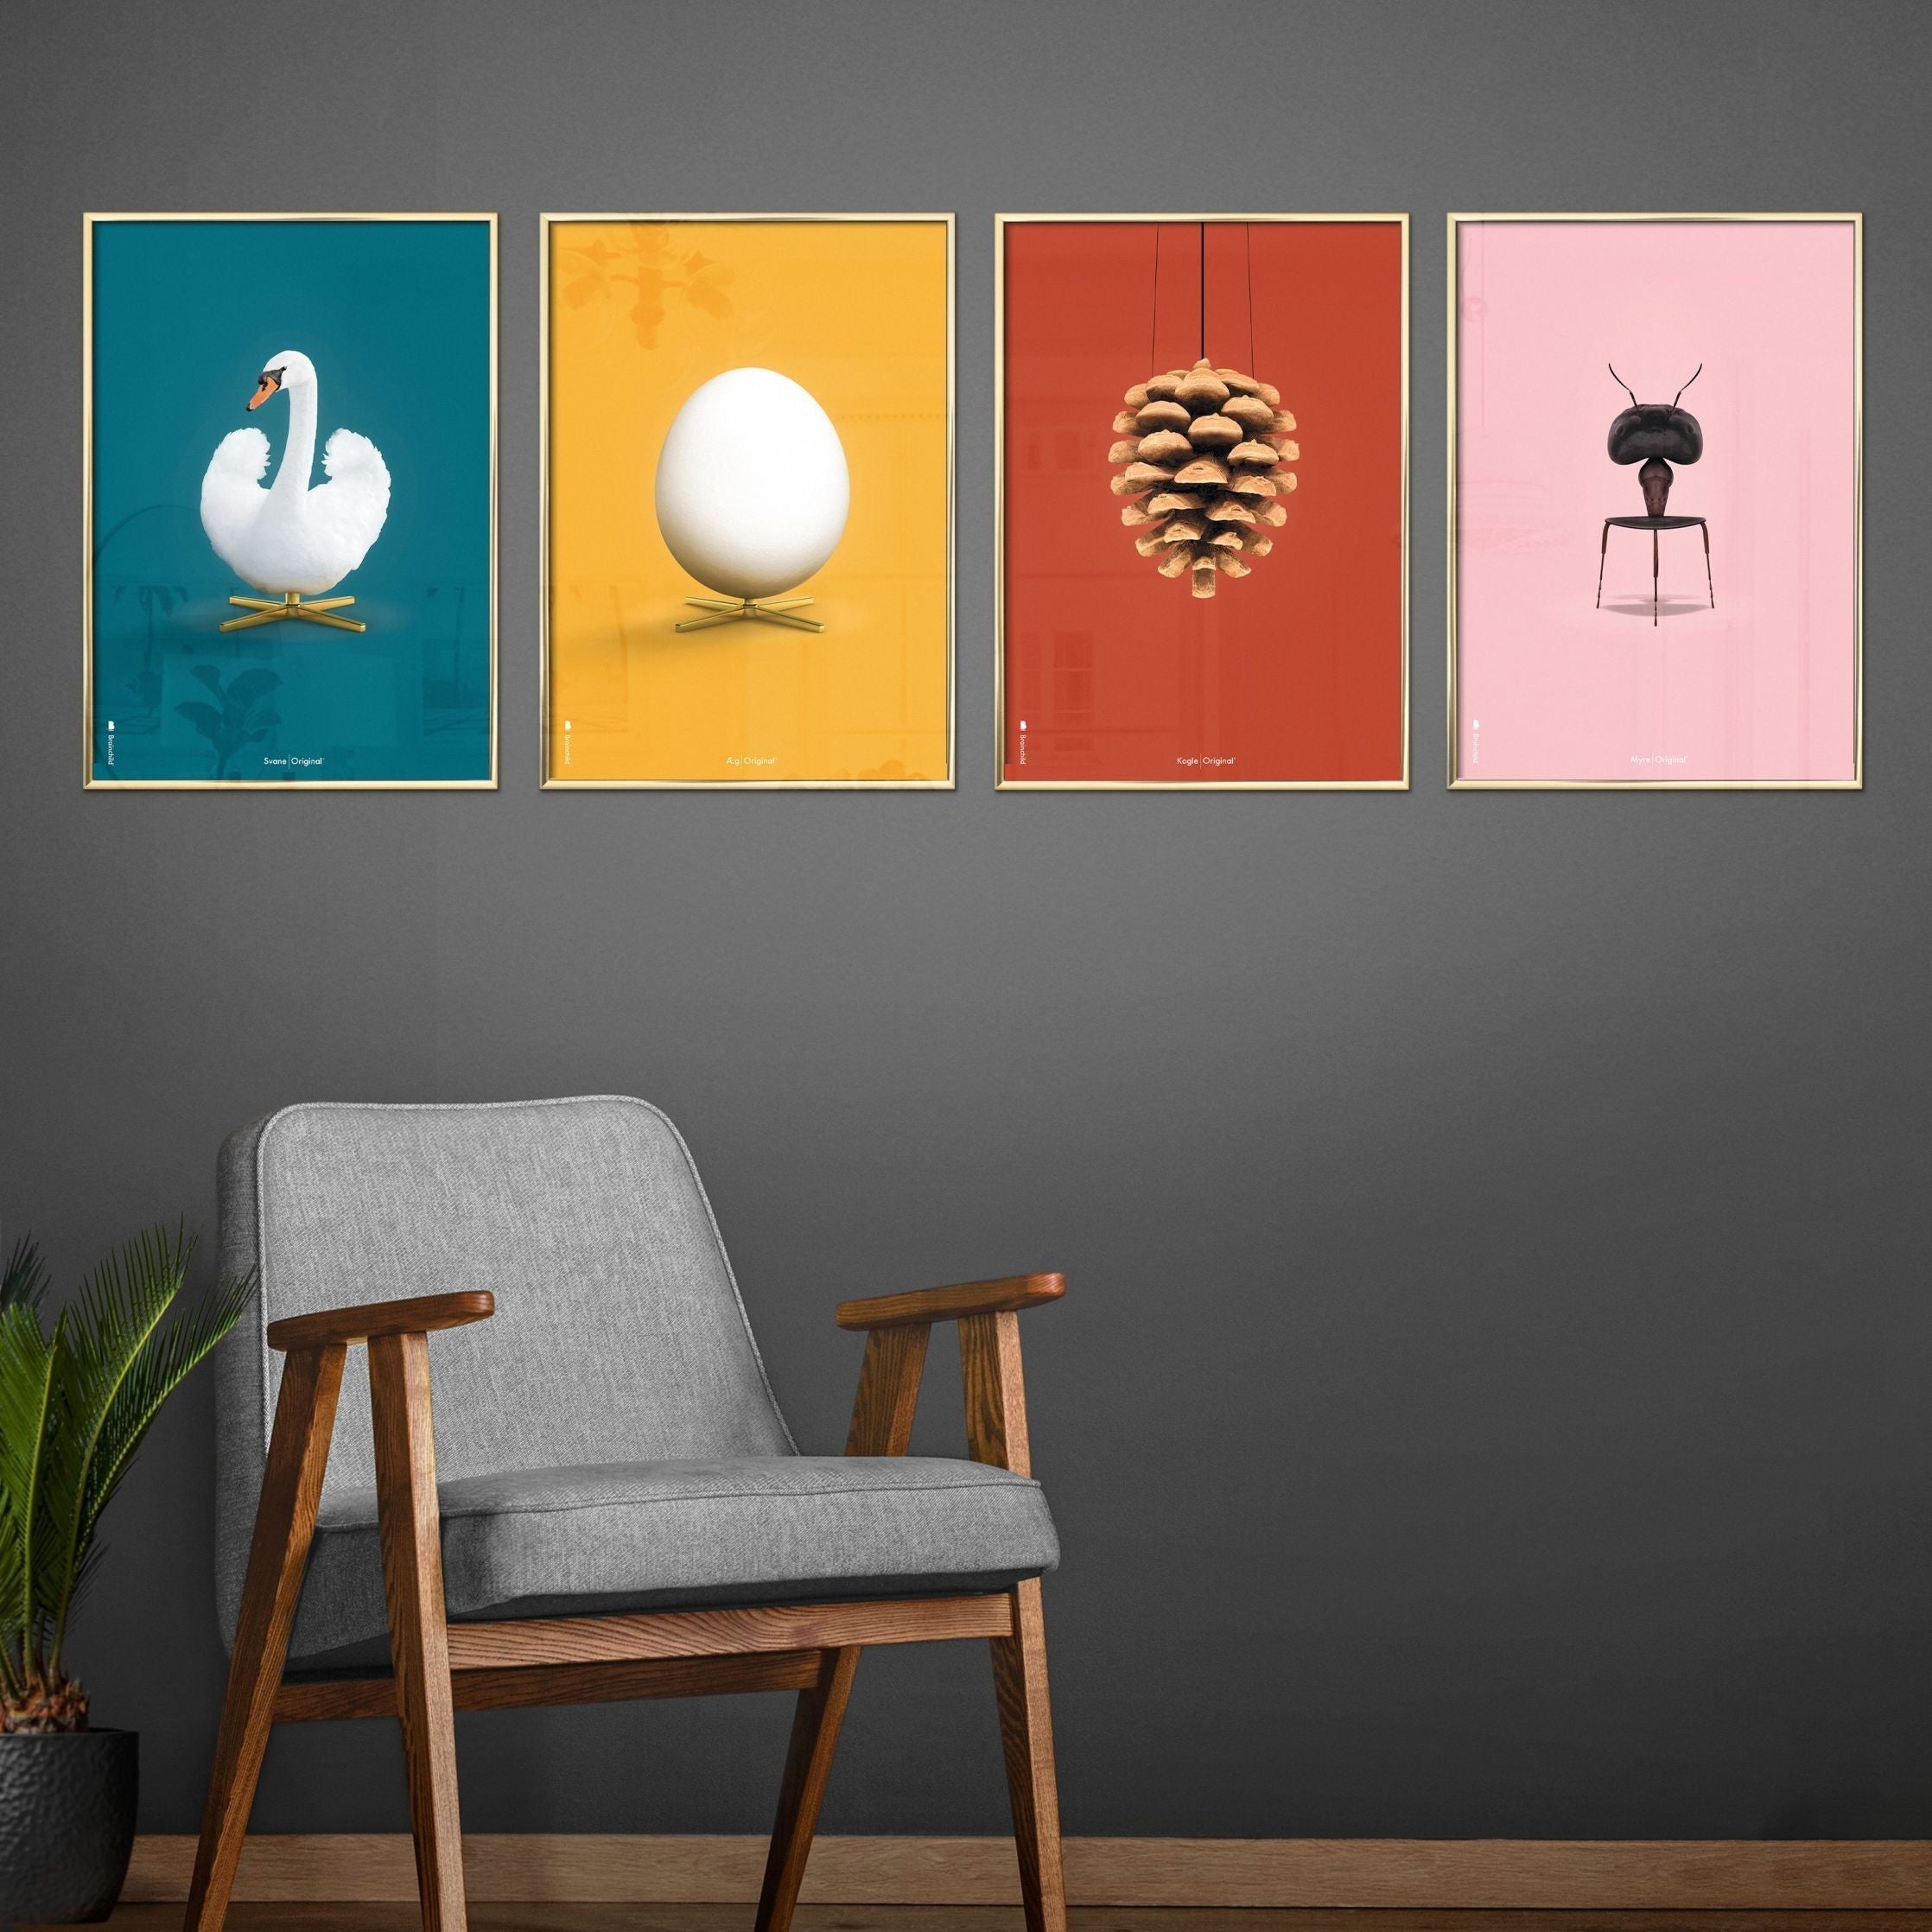 Brainchild Swan Classic Poster, Frame In Black Lacquered Wood 50x70 Cm, Petroleum Blue Background